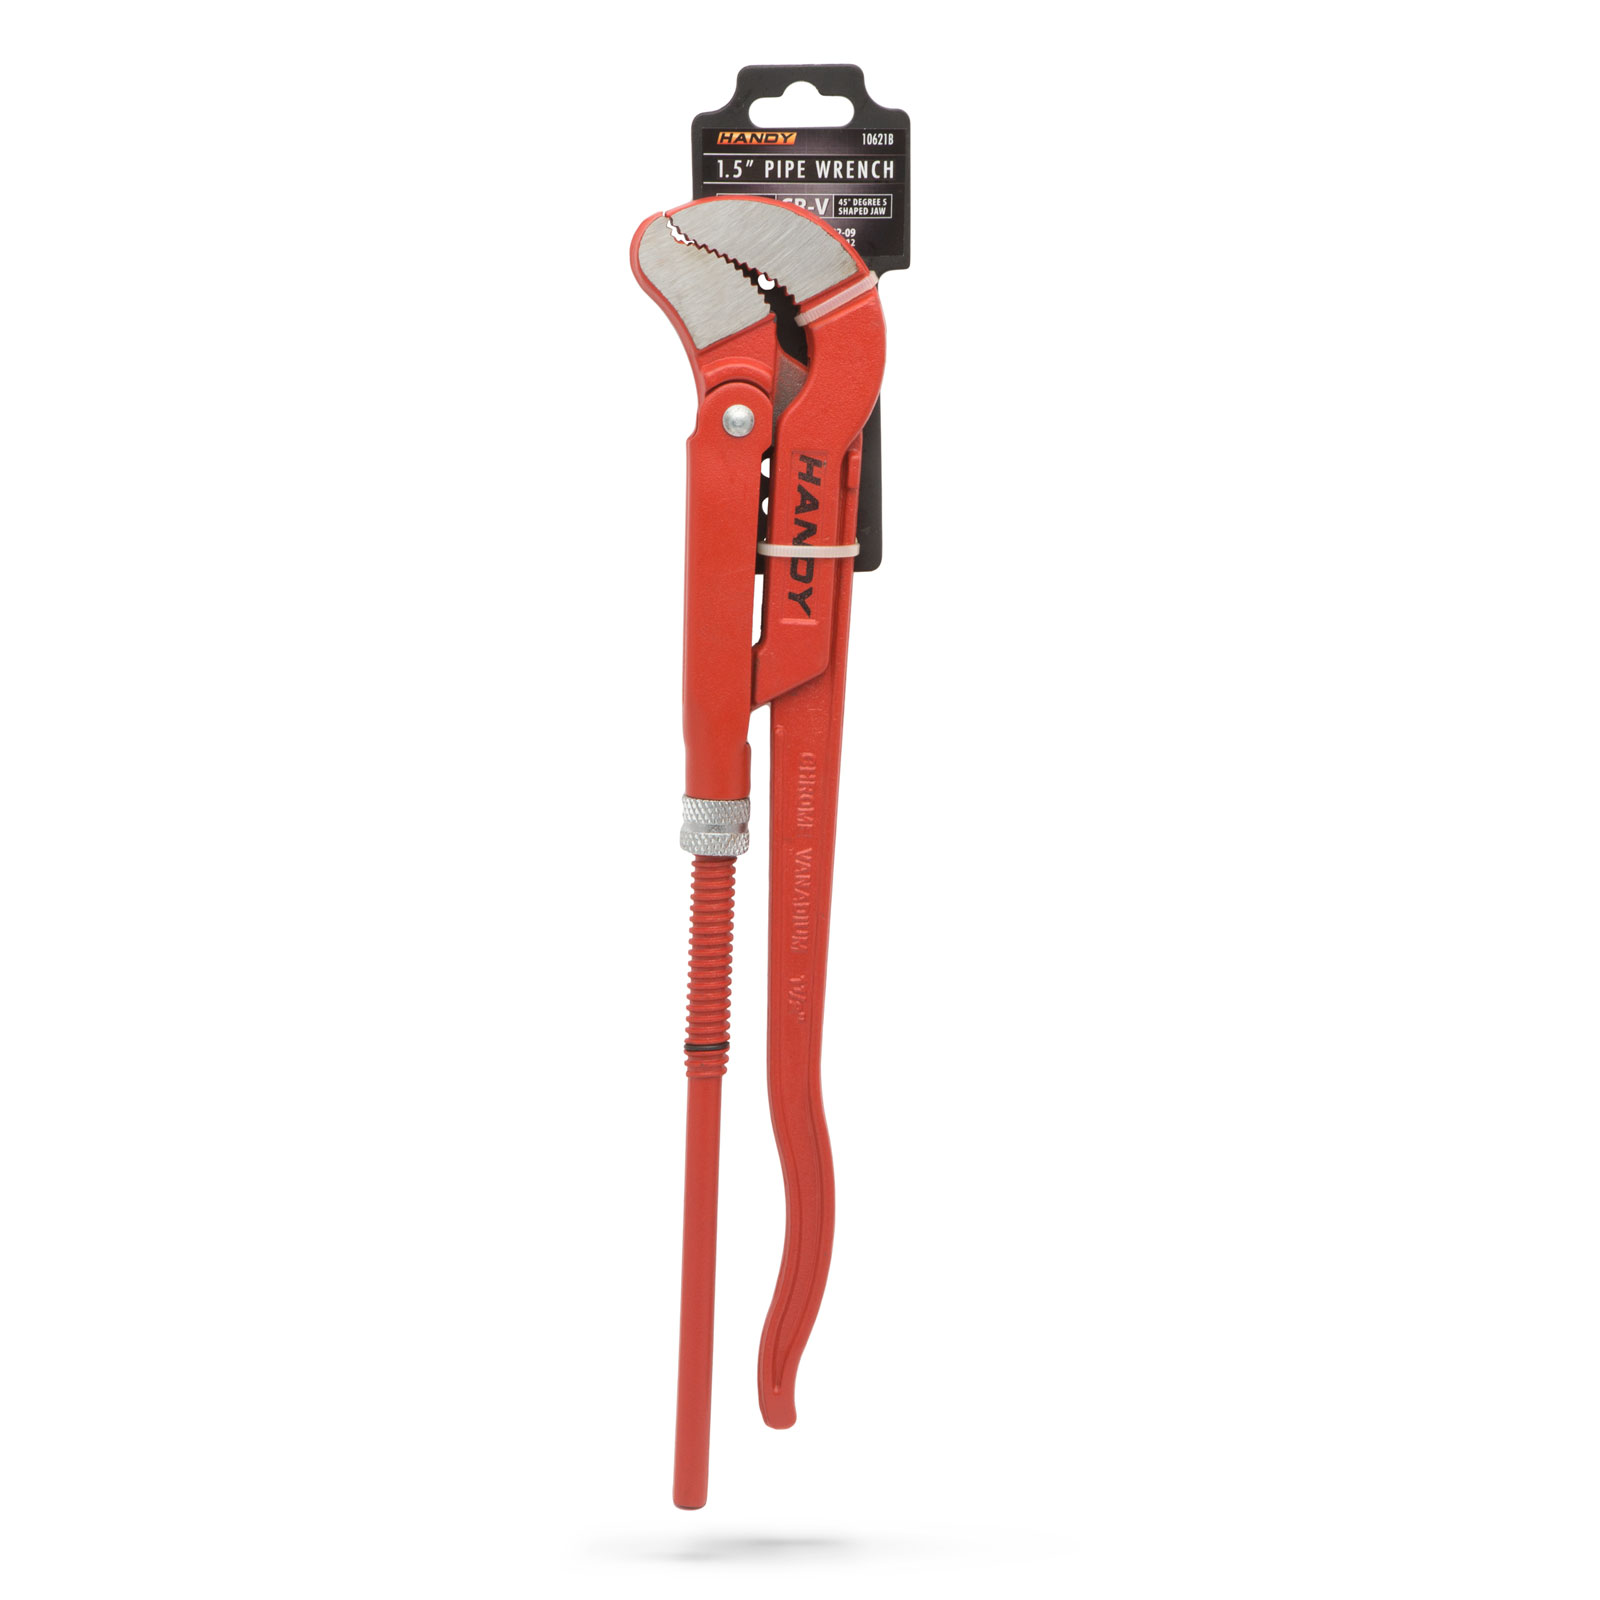 Pipe wrench - 1,5" thumb